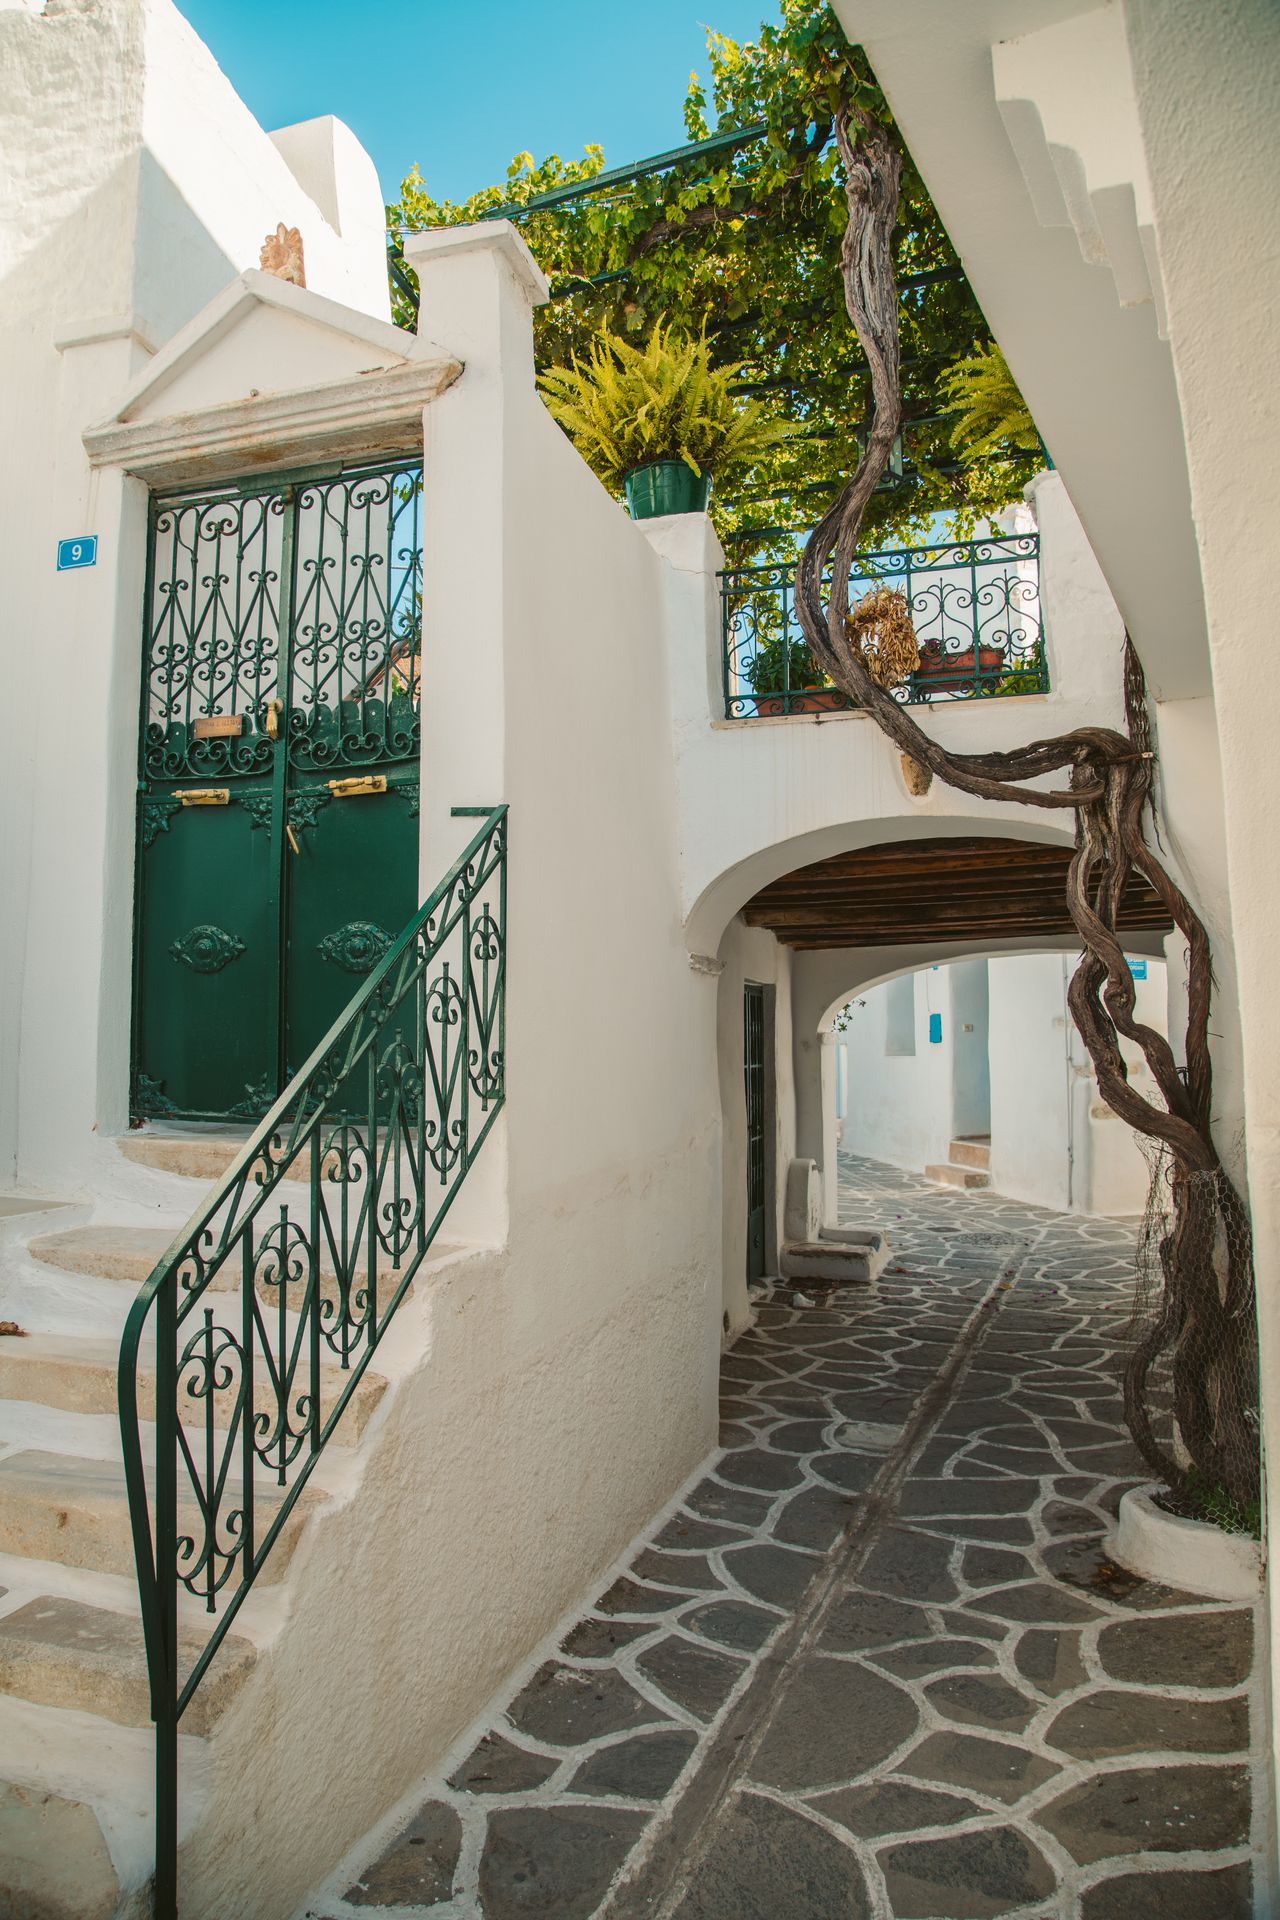 Paroikia, the Hora of Paros, with typical cycladic alleyways